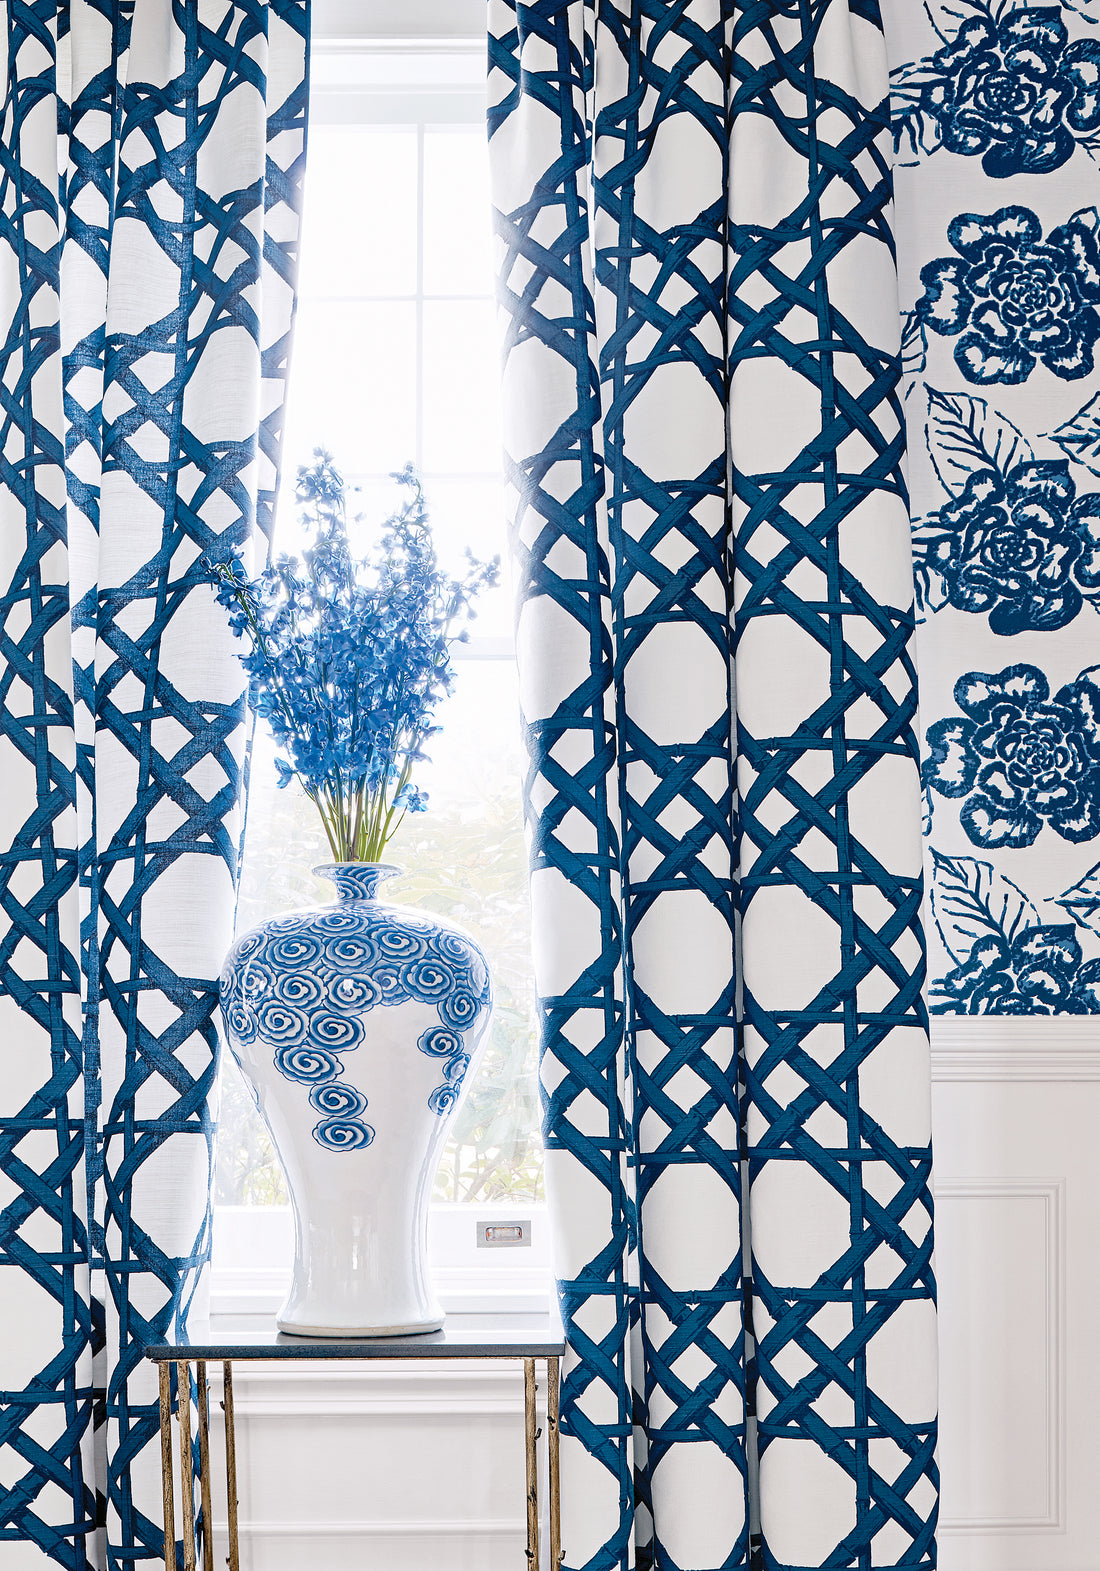 Cyrus Cane printed fabric in navy color - pattern number F913139 - by Thibaut in the Summer House collection